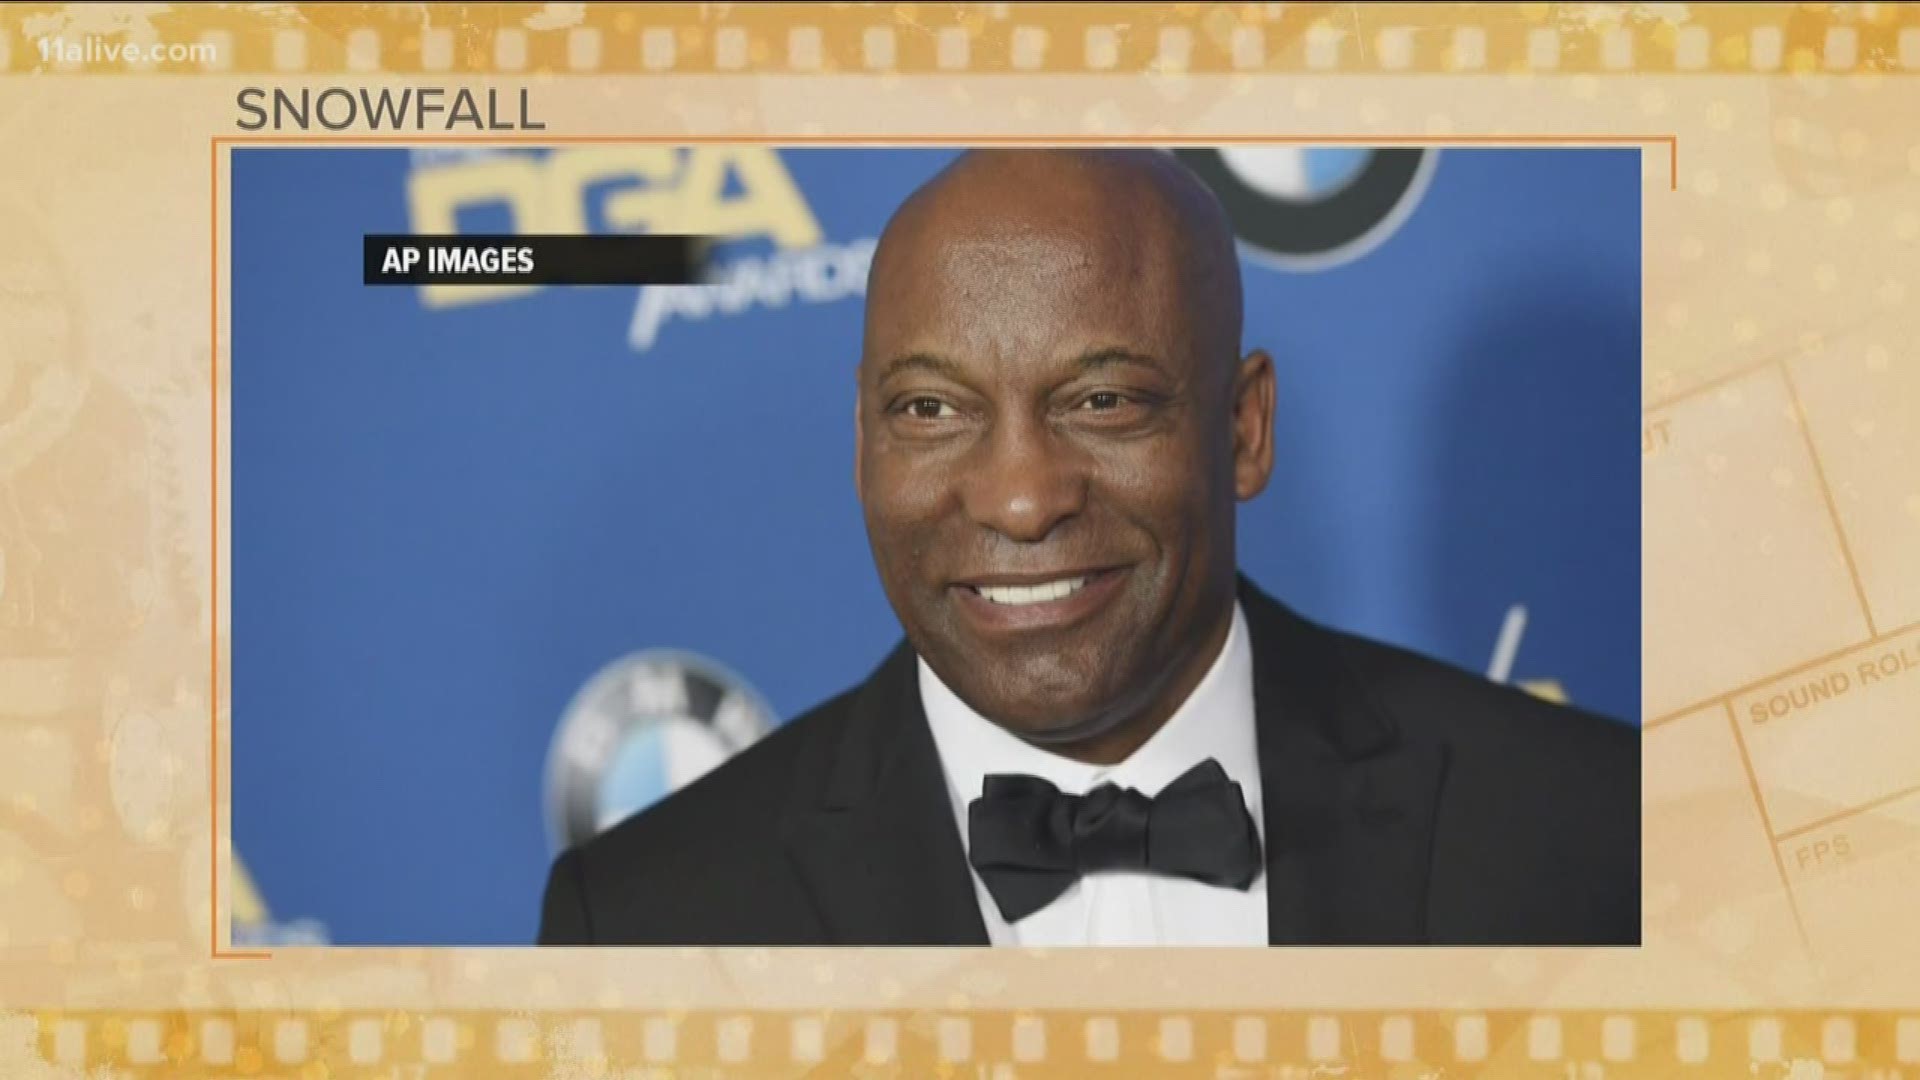 The cast revealed that John Singleton got the chance to watch the first few episodes of the new season before he passed. This was his reaction.